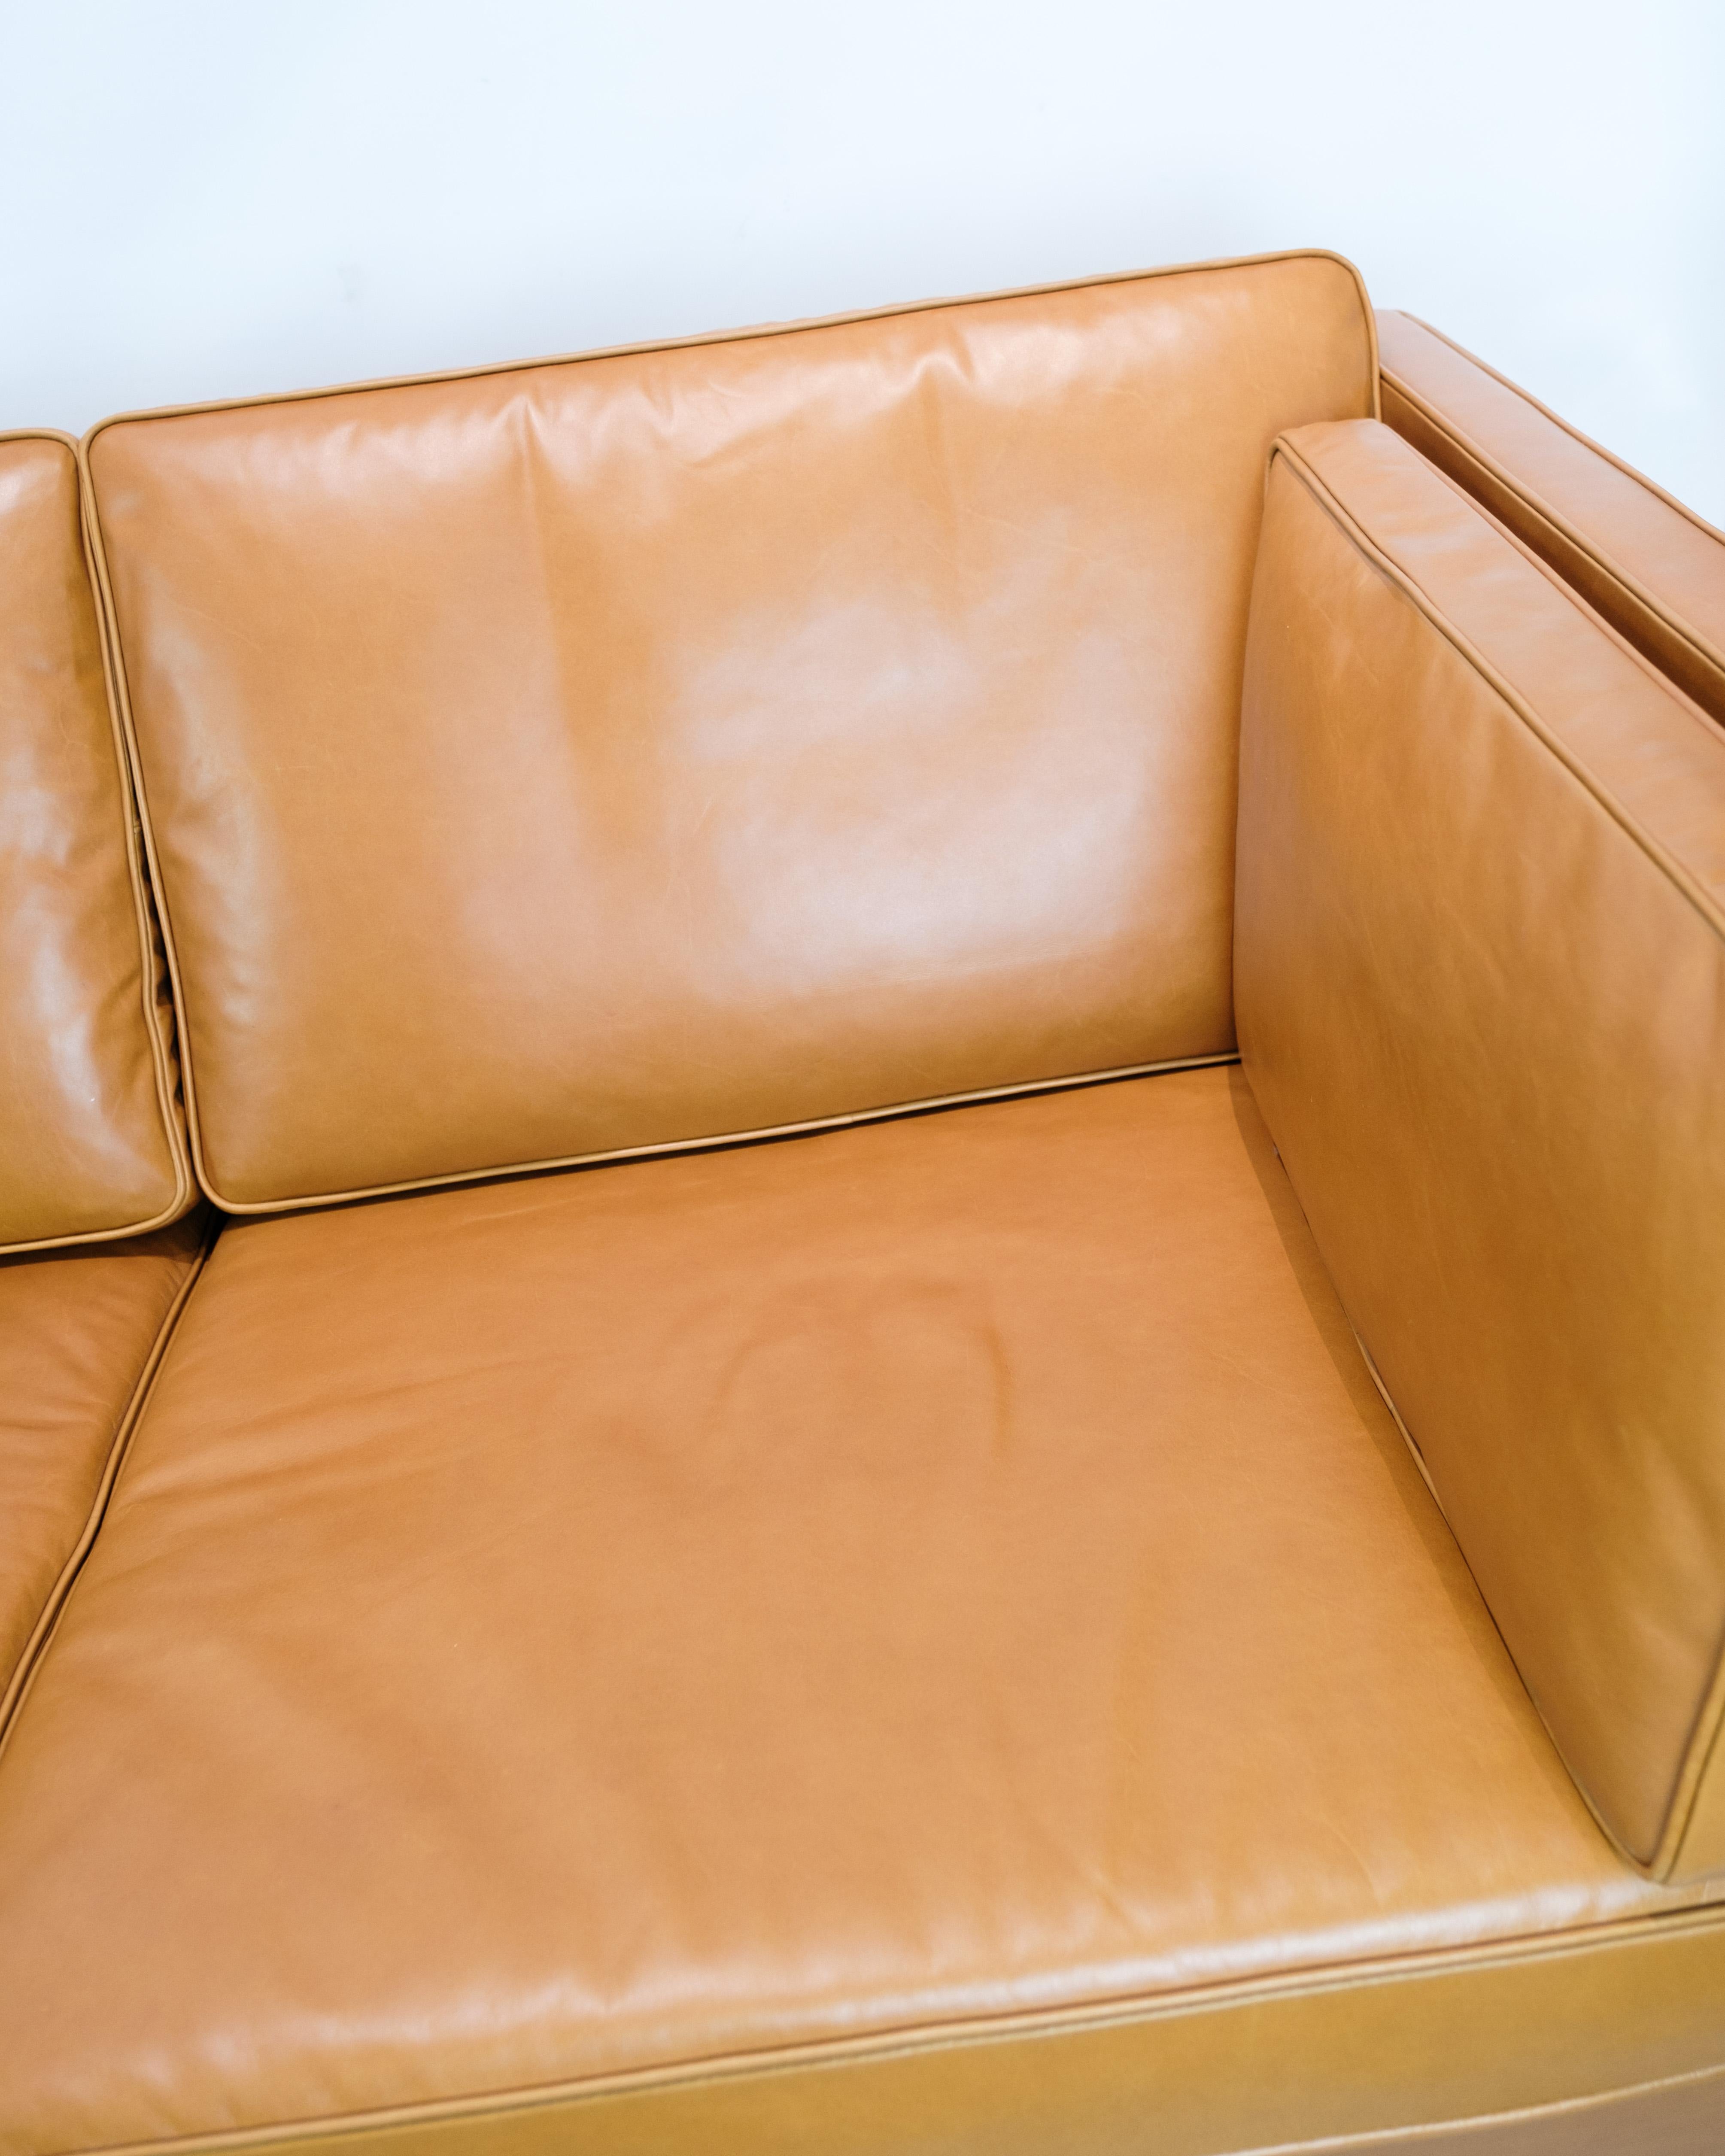 Three-seater sofa In Cognac leather, Model 2333 By Børge Mogensen From 1960s For Sale 4